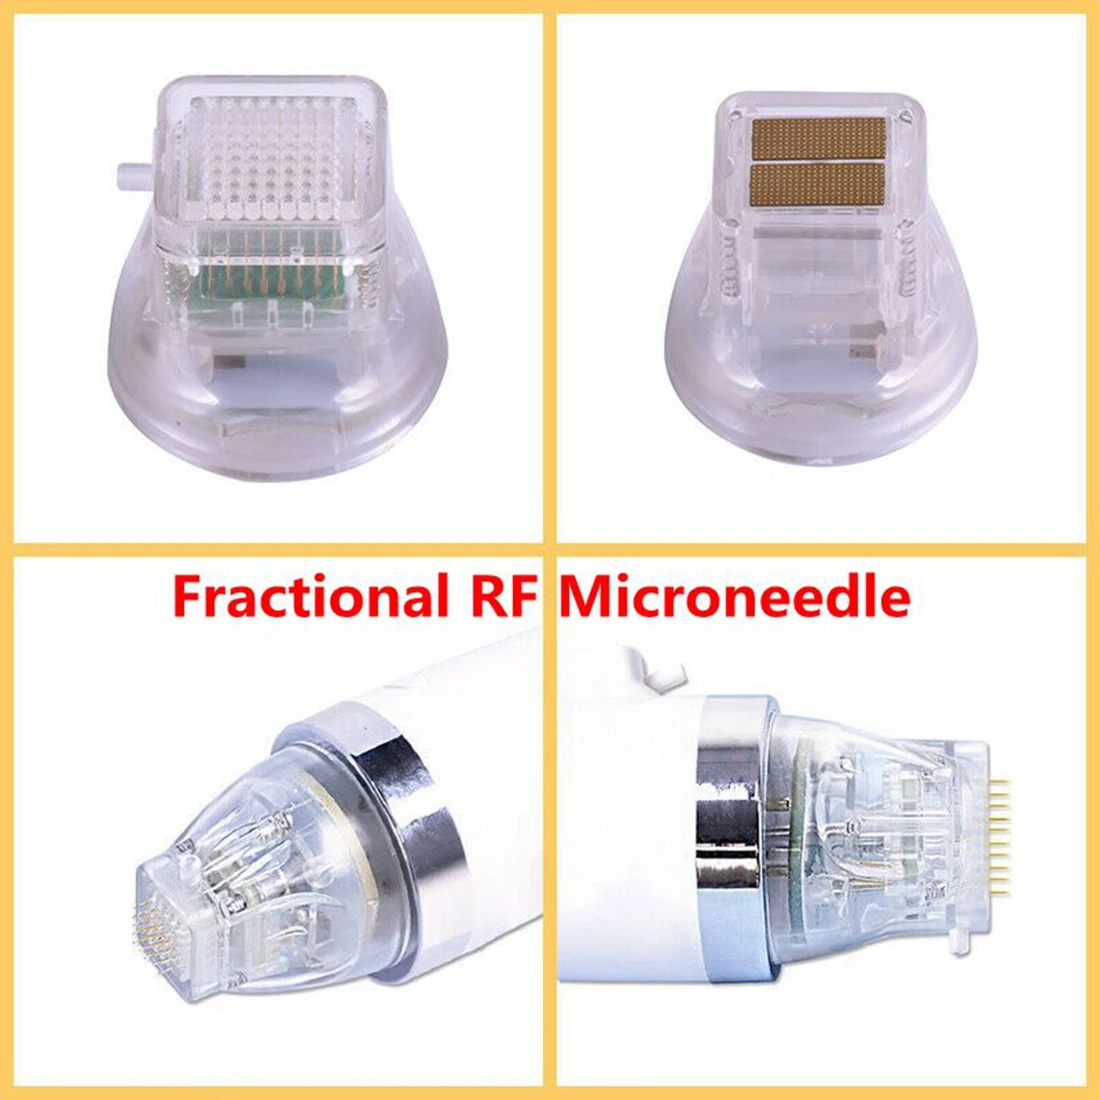 

Disposable Microneedling Cartridges Fractional RF Microneedle Machine Spare Part Tips Replacement Needle Head